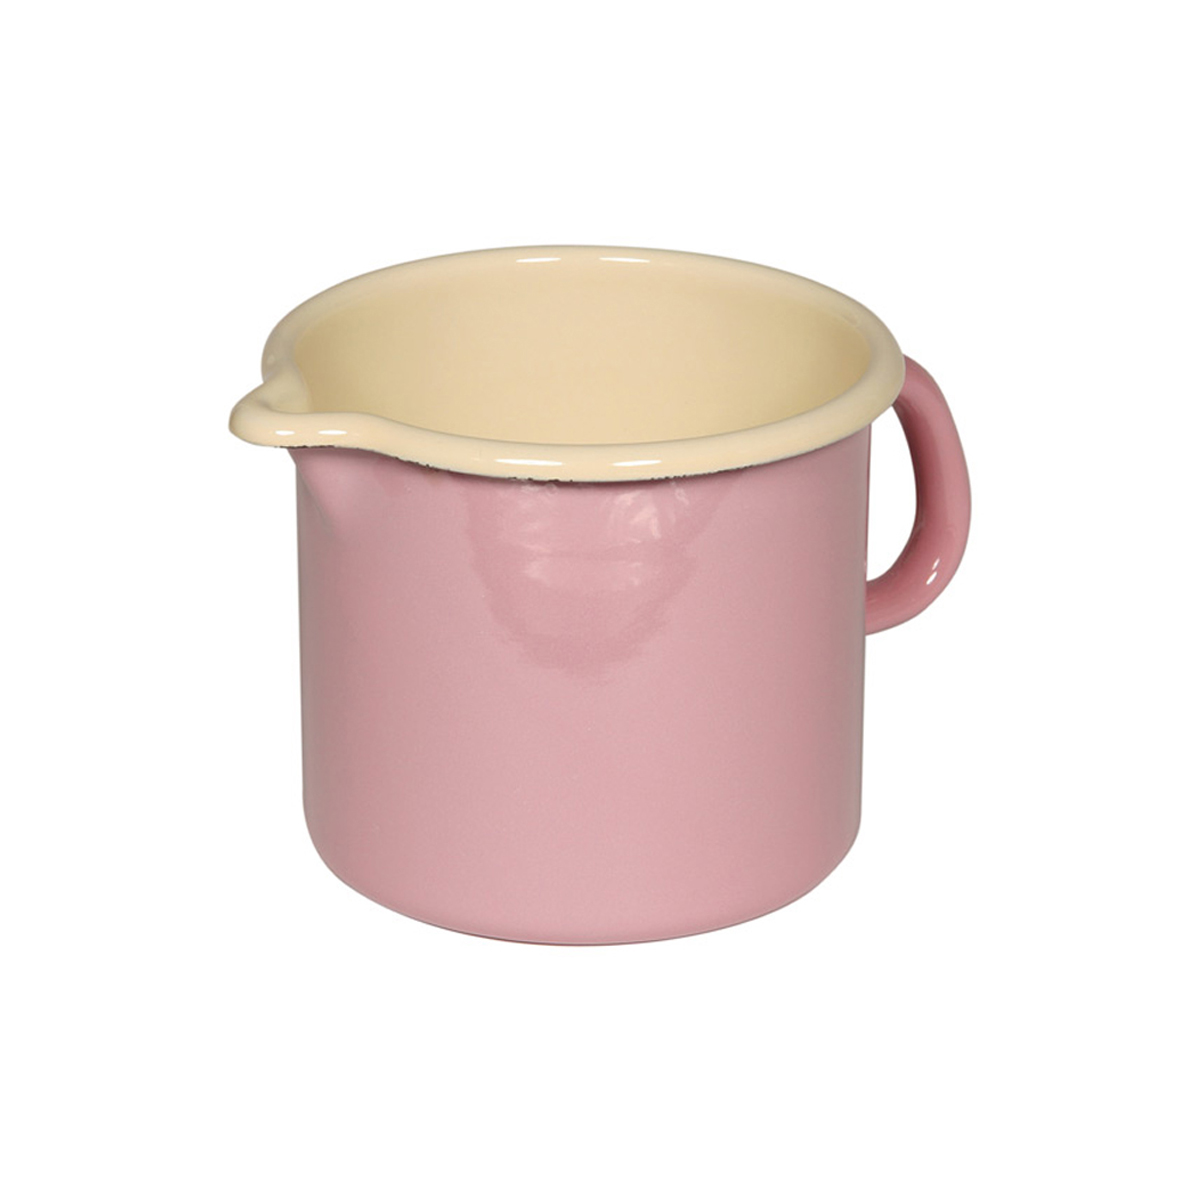 Riess Classic Bunt - Pastell Schnabeltopf Rosa 12 cm / 1,0 Ltr / aus Emaille